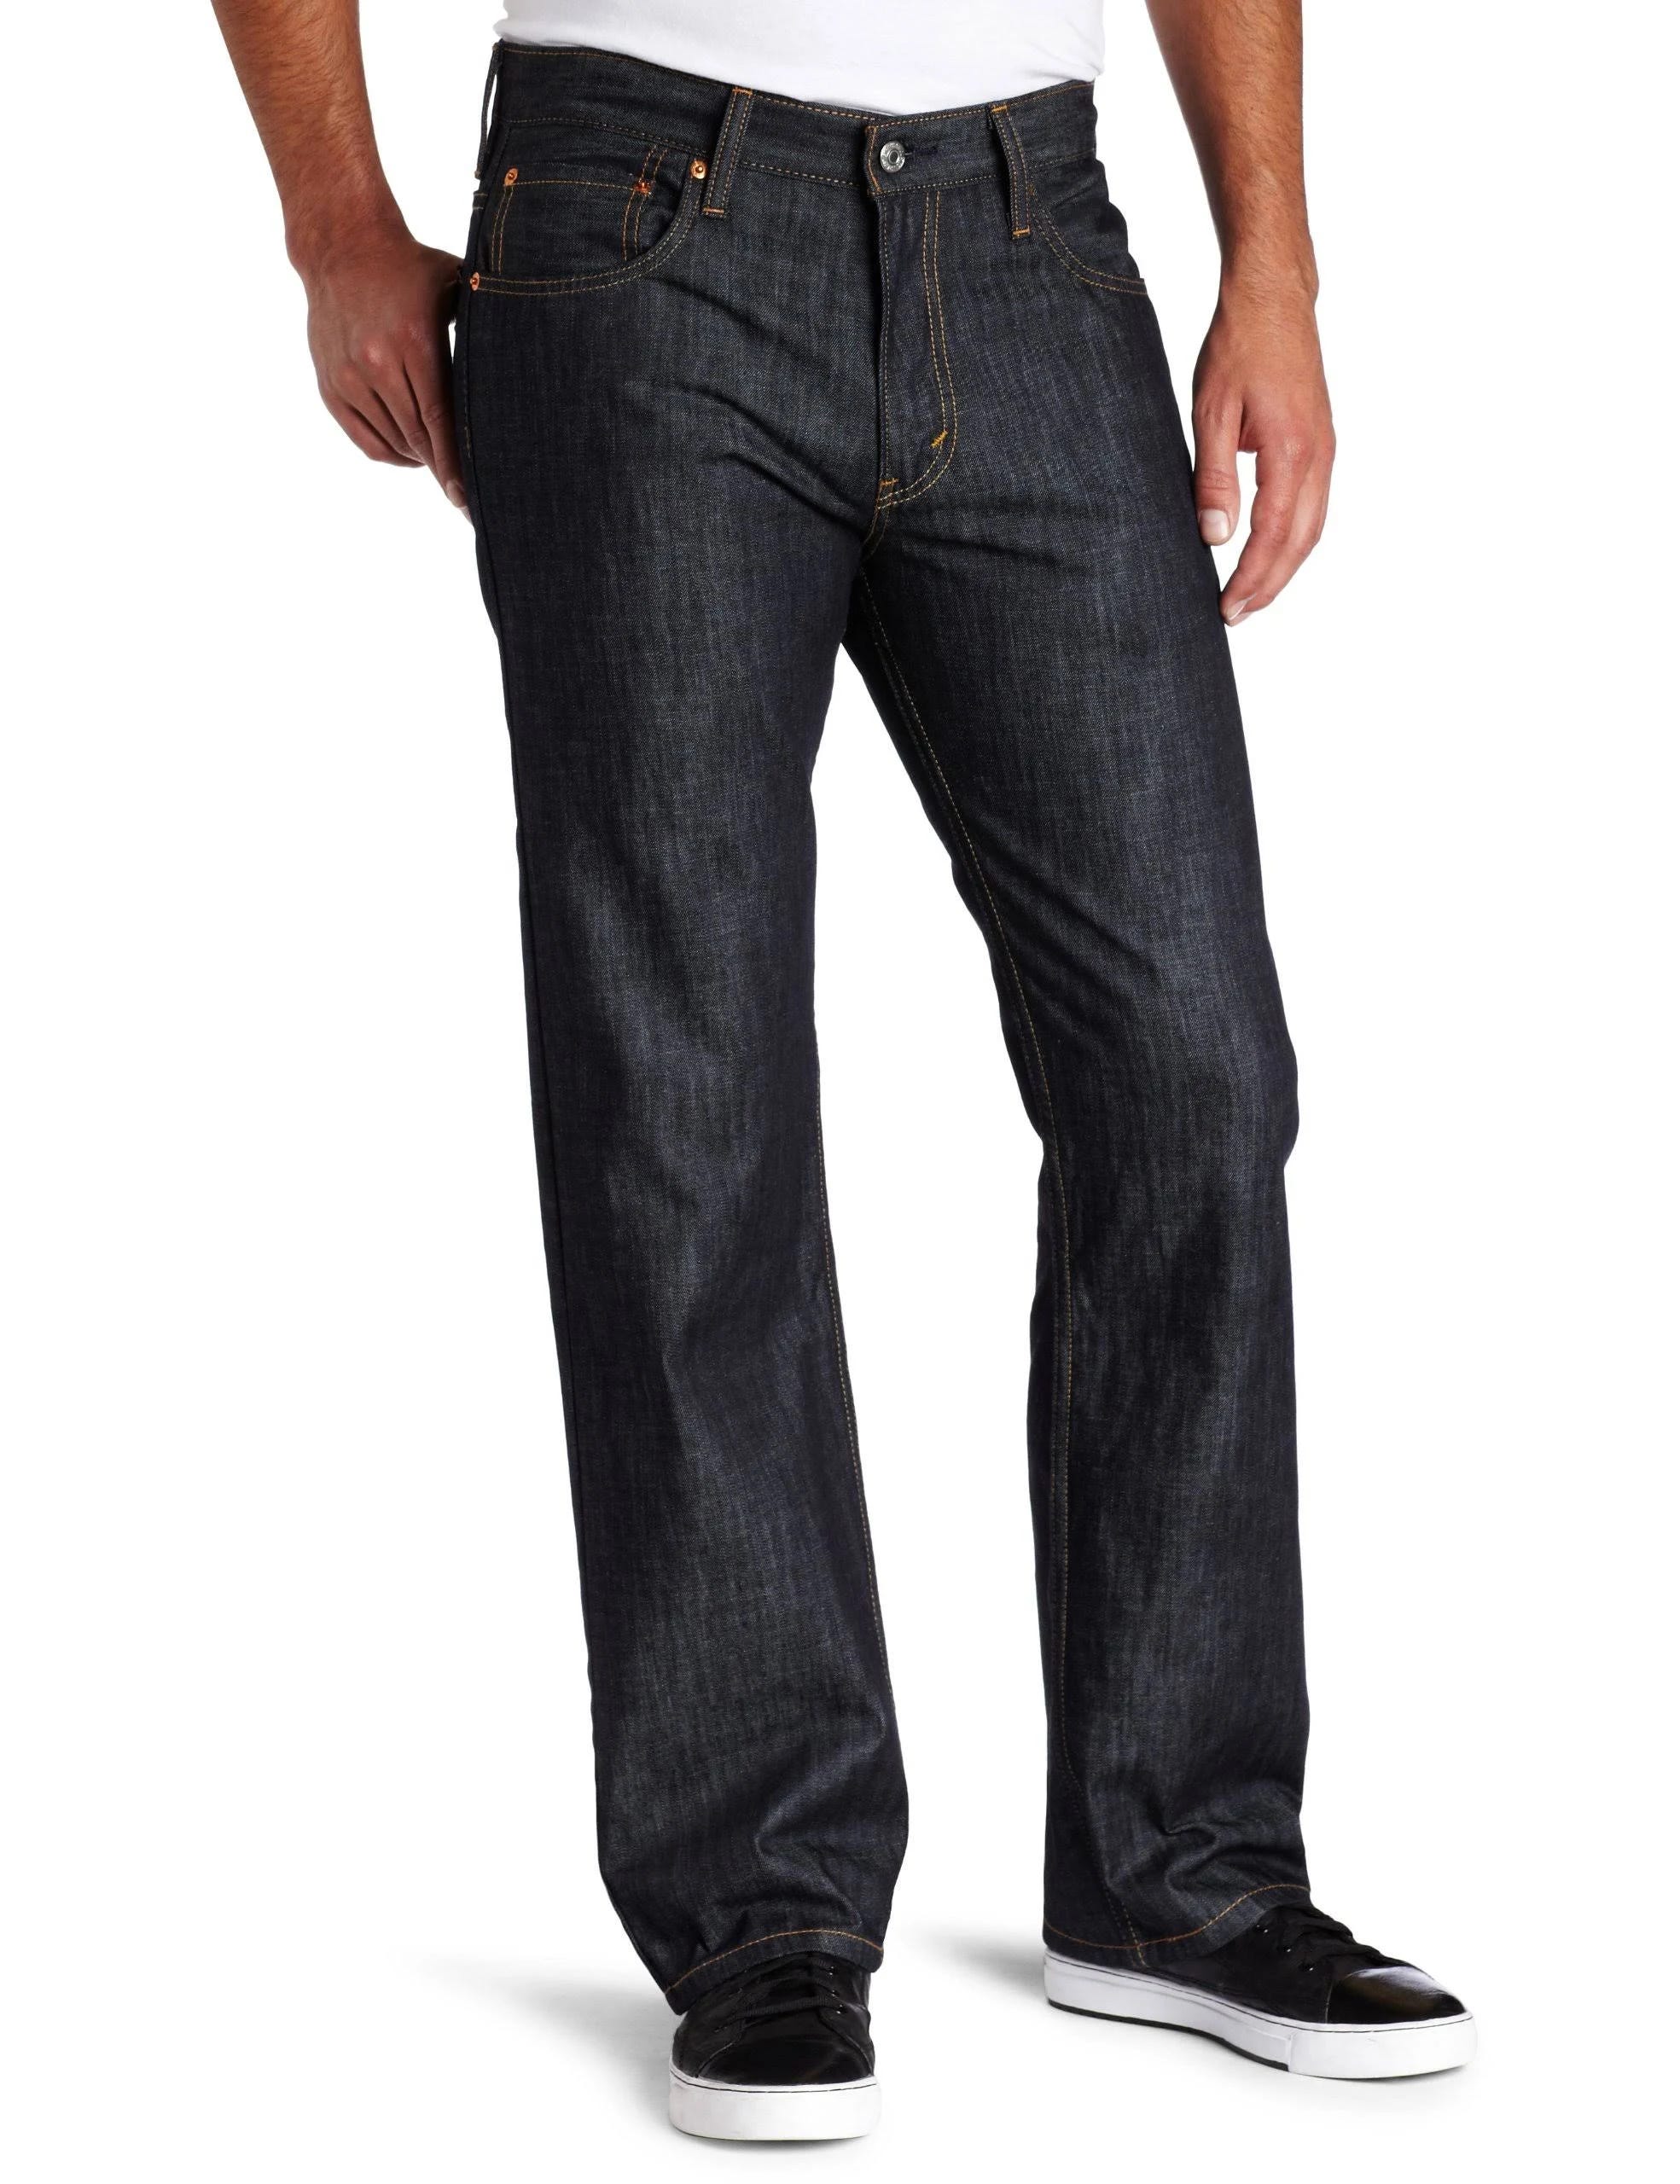 Loose Straight Fit Men's Jeans in Ice Cap Medium Wash Style | Image